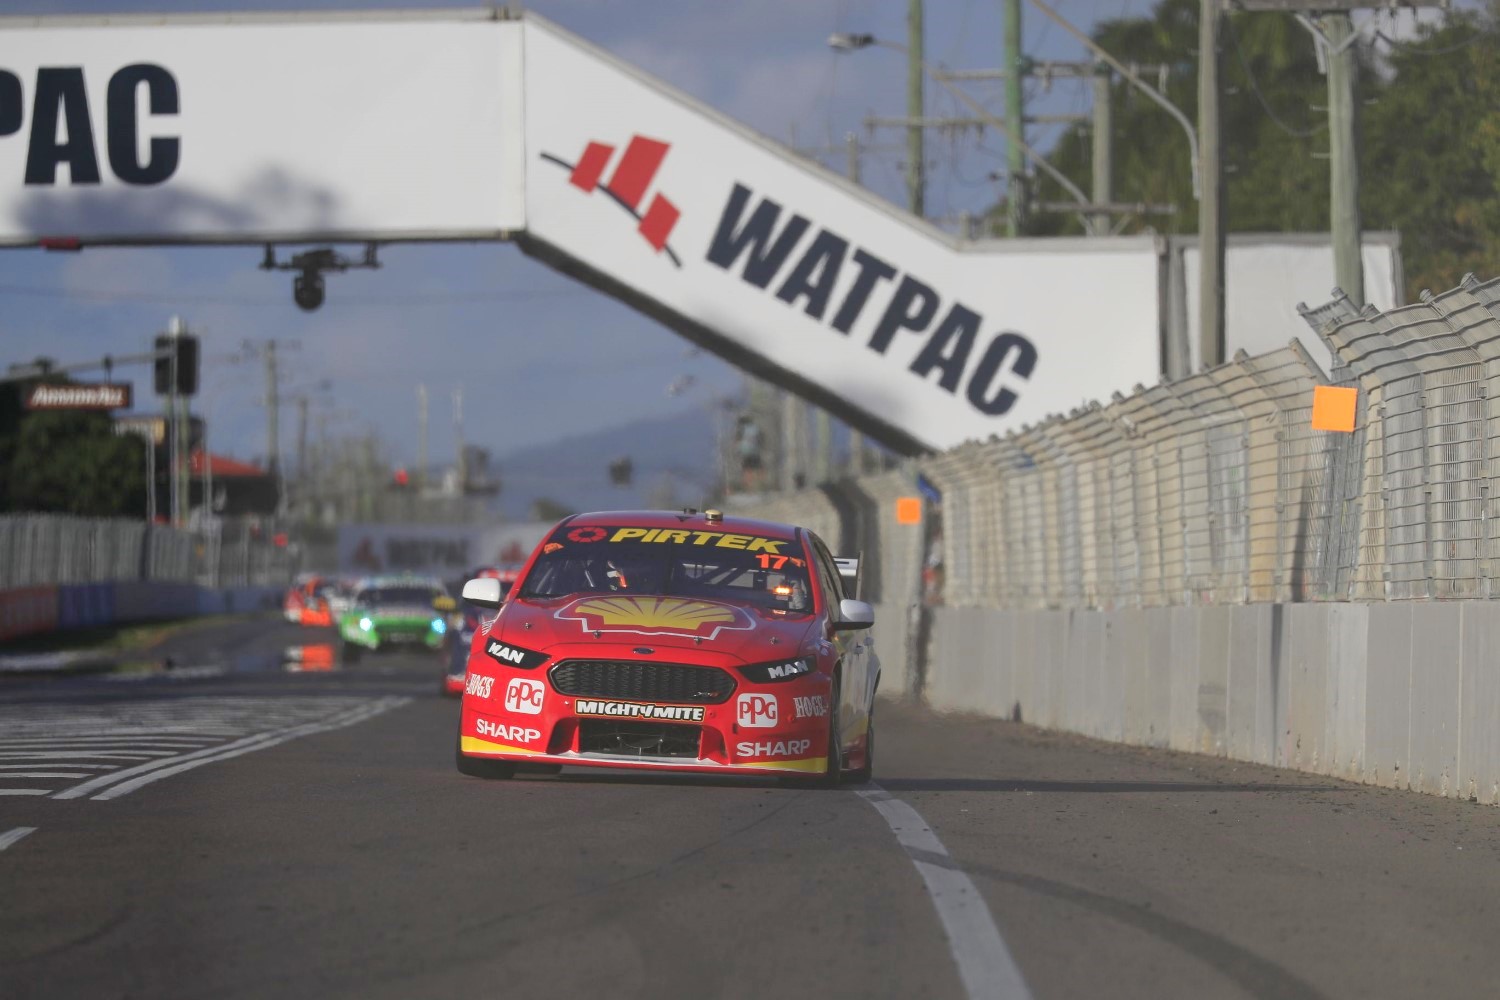 McLaughlin gives chase but settled for 2nd